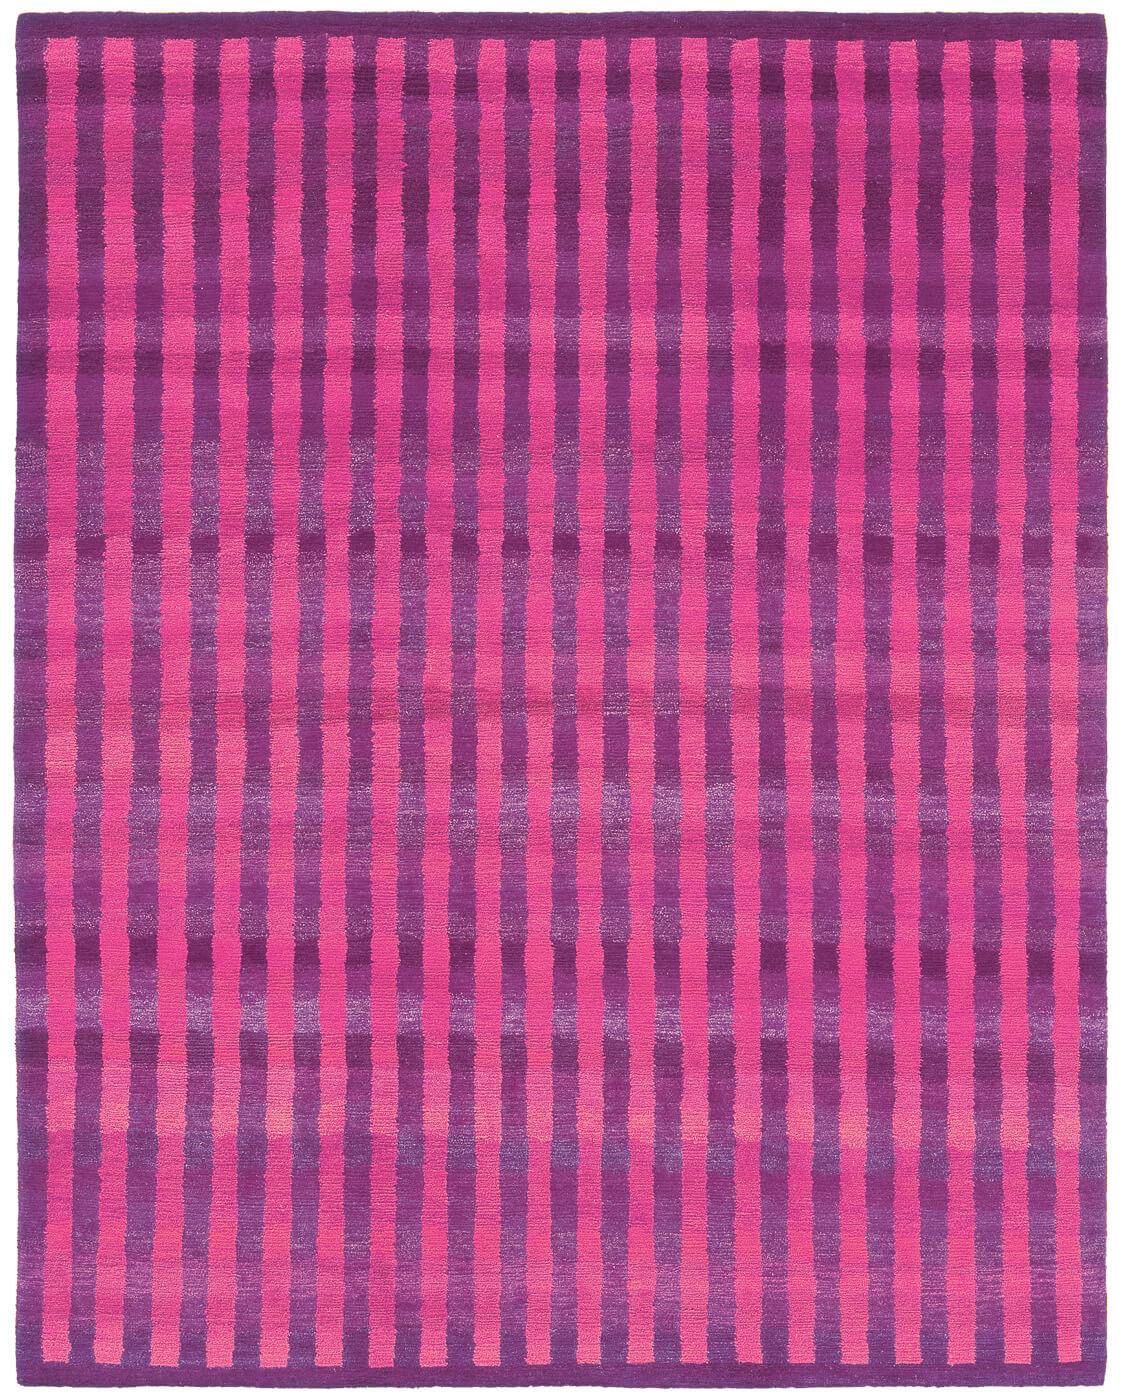 Hand-woven Pink Stripes Luxury Rug ☞ Size: 200 x 300 cm